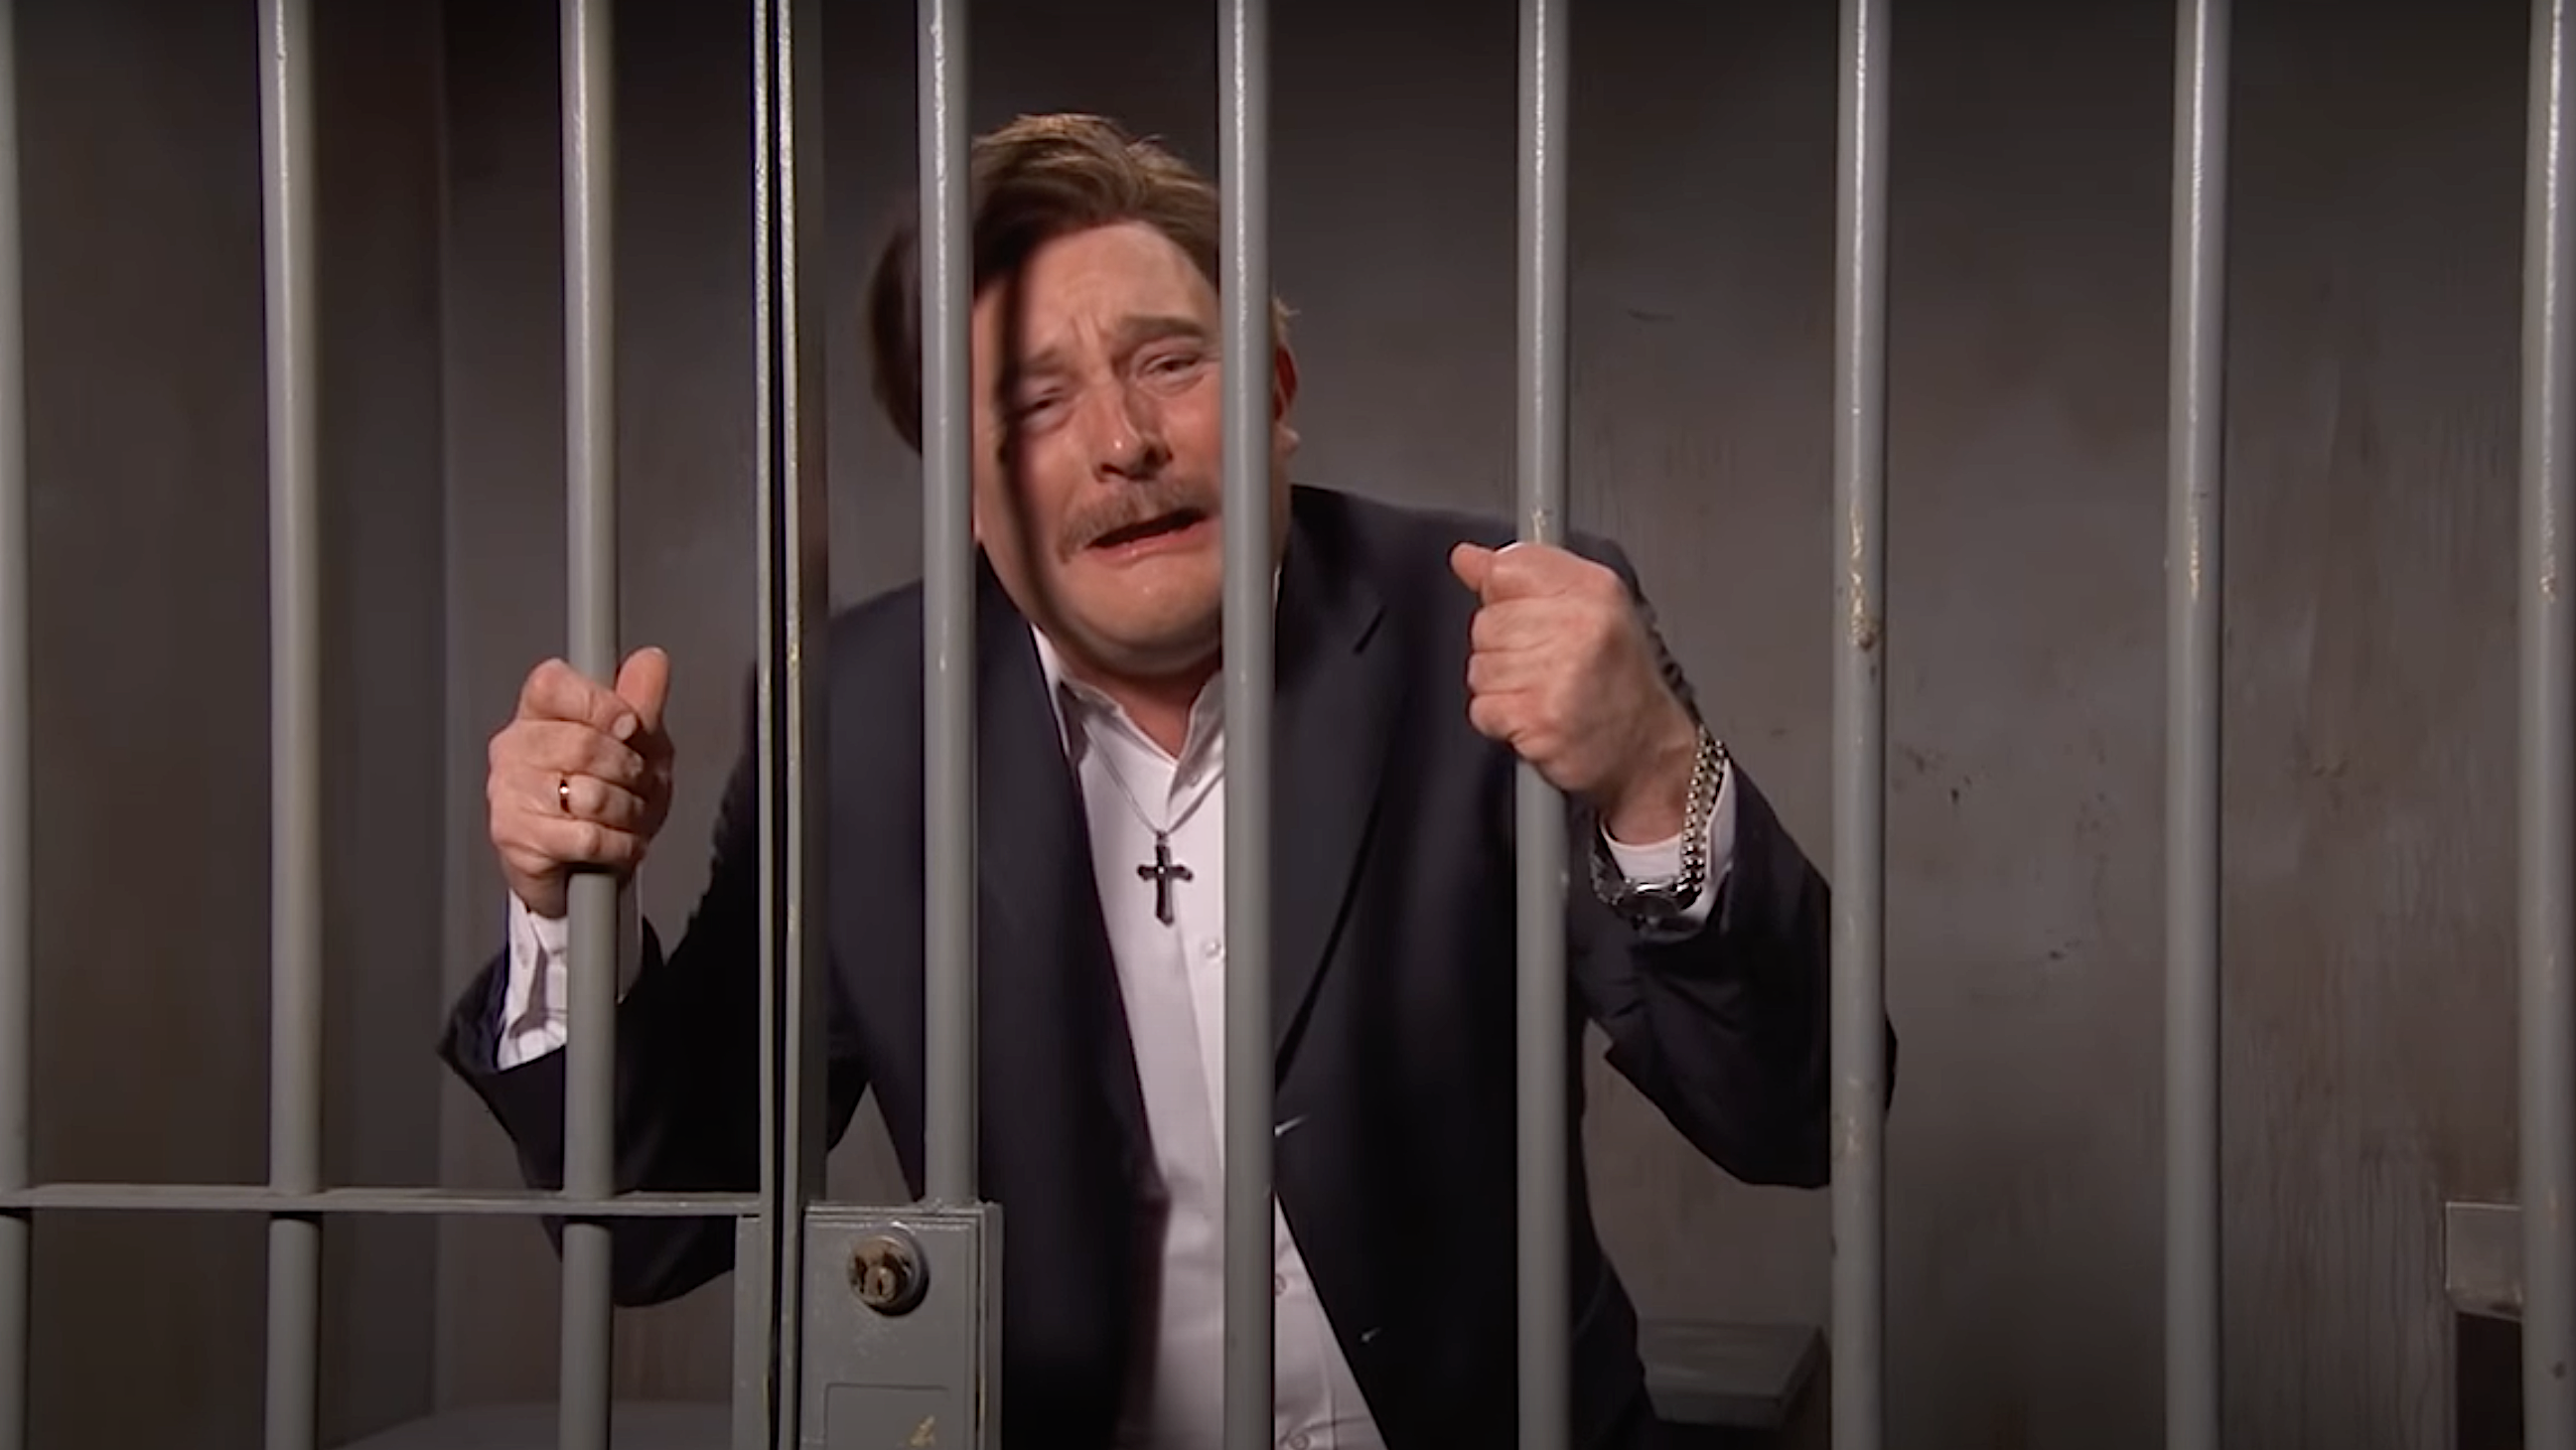 Sleep-sack seditionist Mike Lindell preps for the next riot from prison on Jimmy Kimmel Live